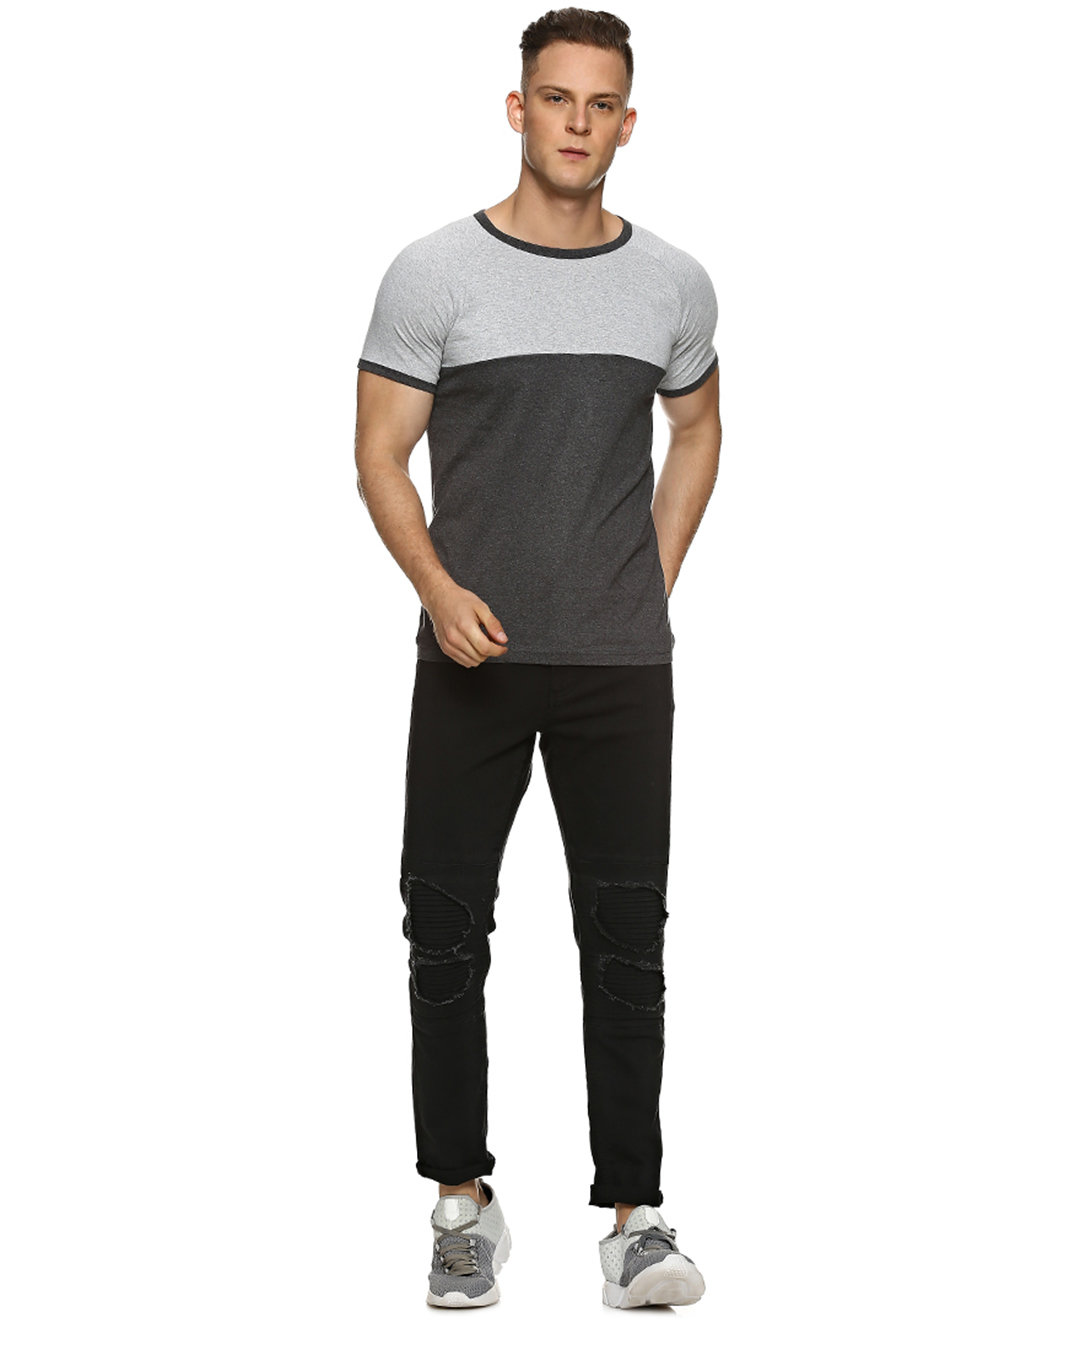 Shop Solid Men's Round or Crew Grey T-Shirt-Back